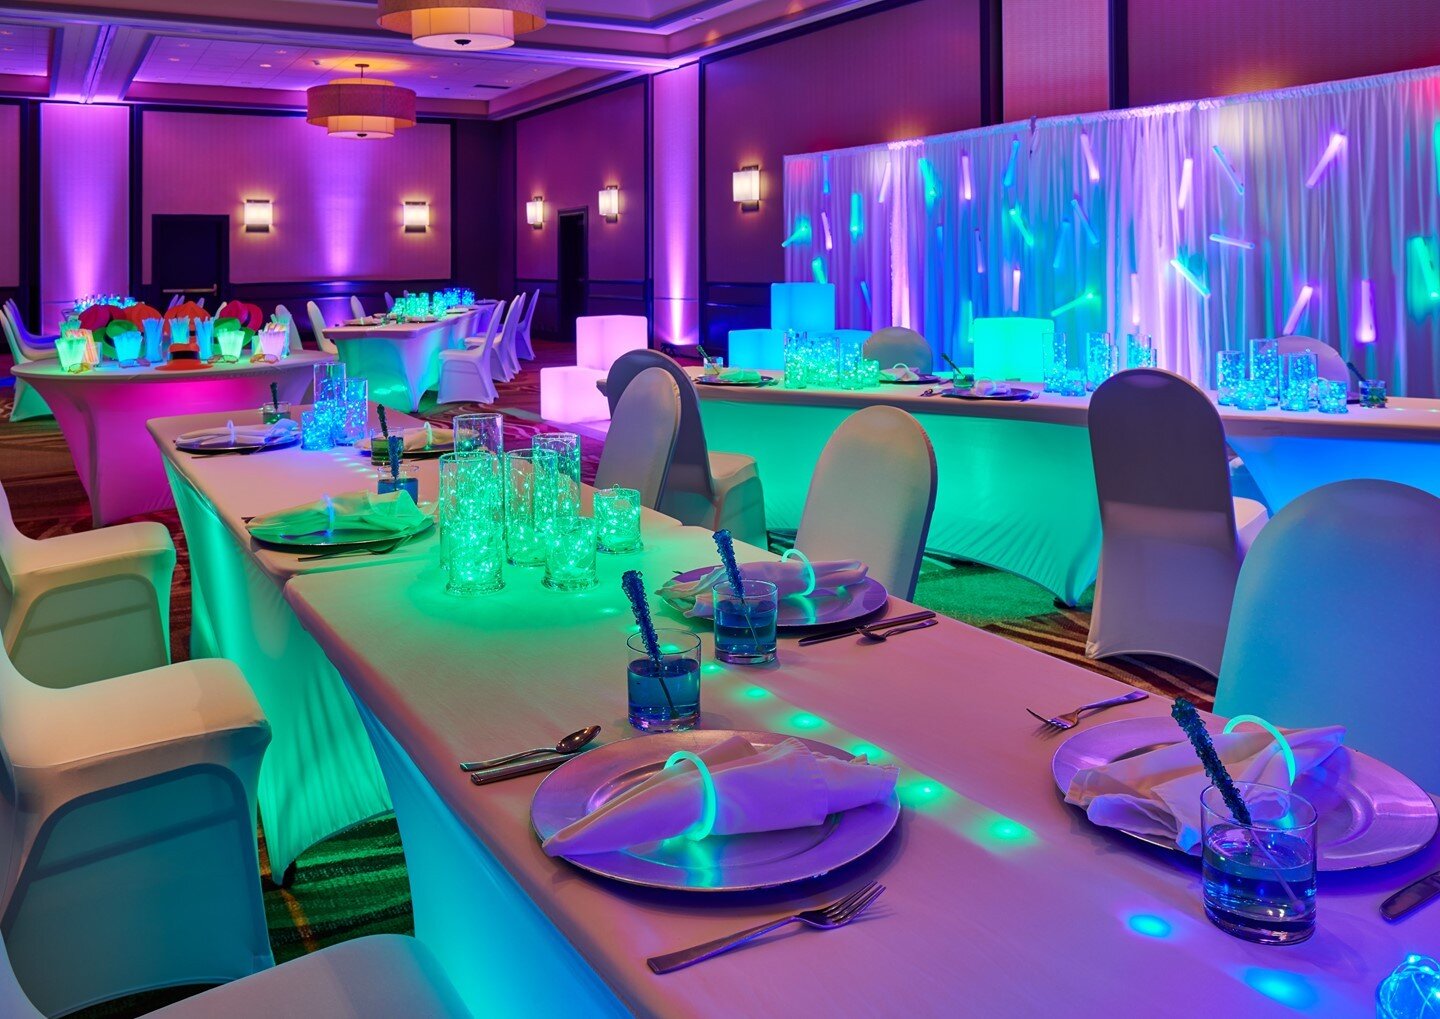 Neon Glow Parties are timeless! Plan your teens Mitzvah with us @northshoreballroom today and ask about our Mitzvah Menu &amp; Package options ✨
&bull;
&bull;
&bull;
&bull;
&bull;
&bull;
&bull;
&bull;
#barmitzvah #batmitzvah #bnaimitzvah #mazeltov #m